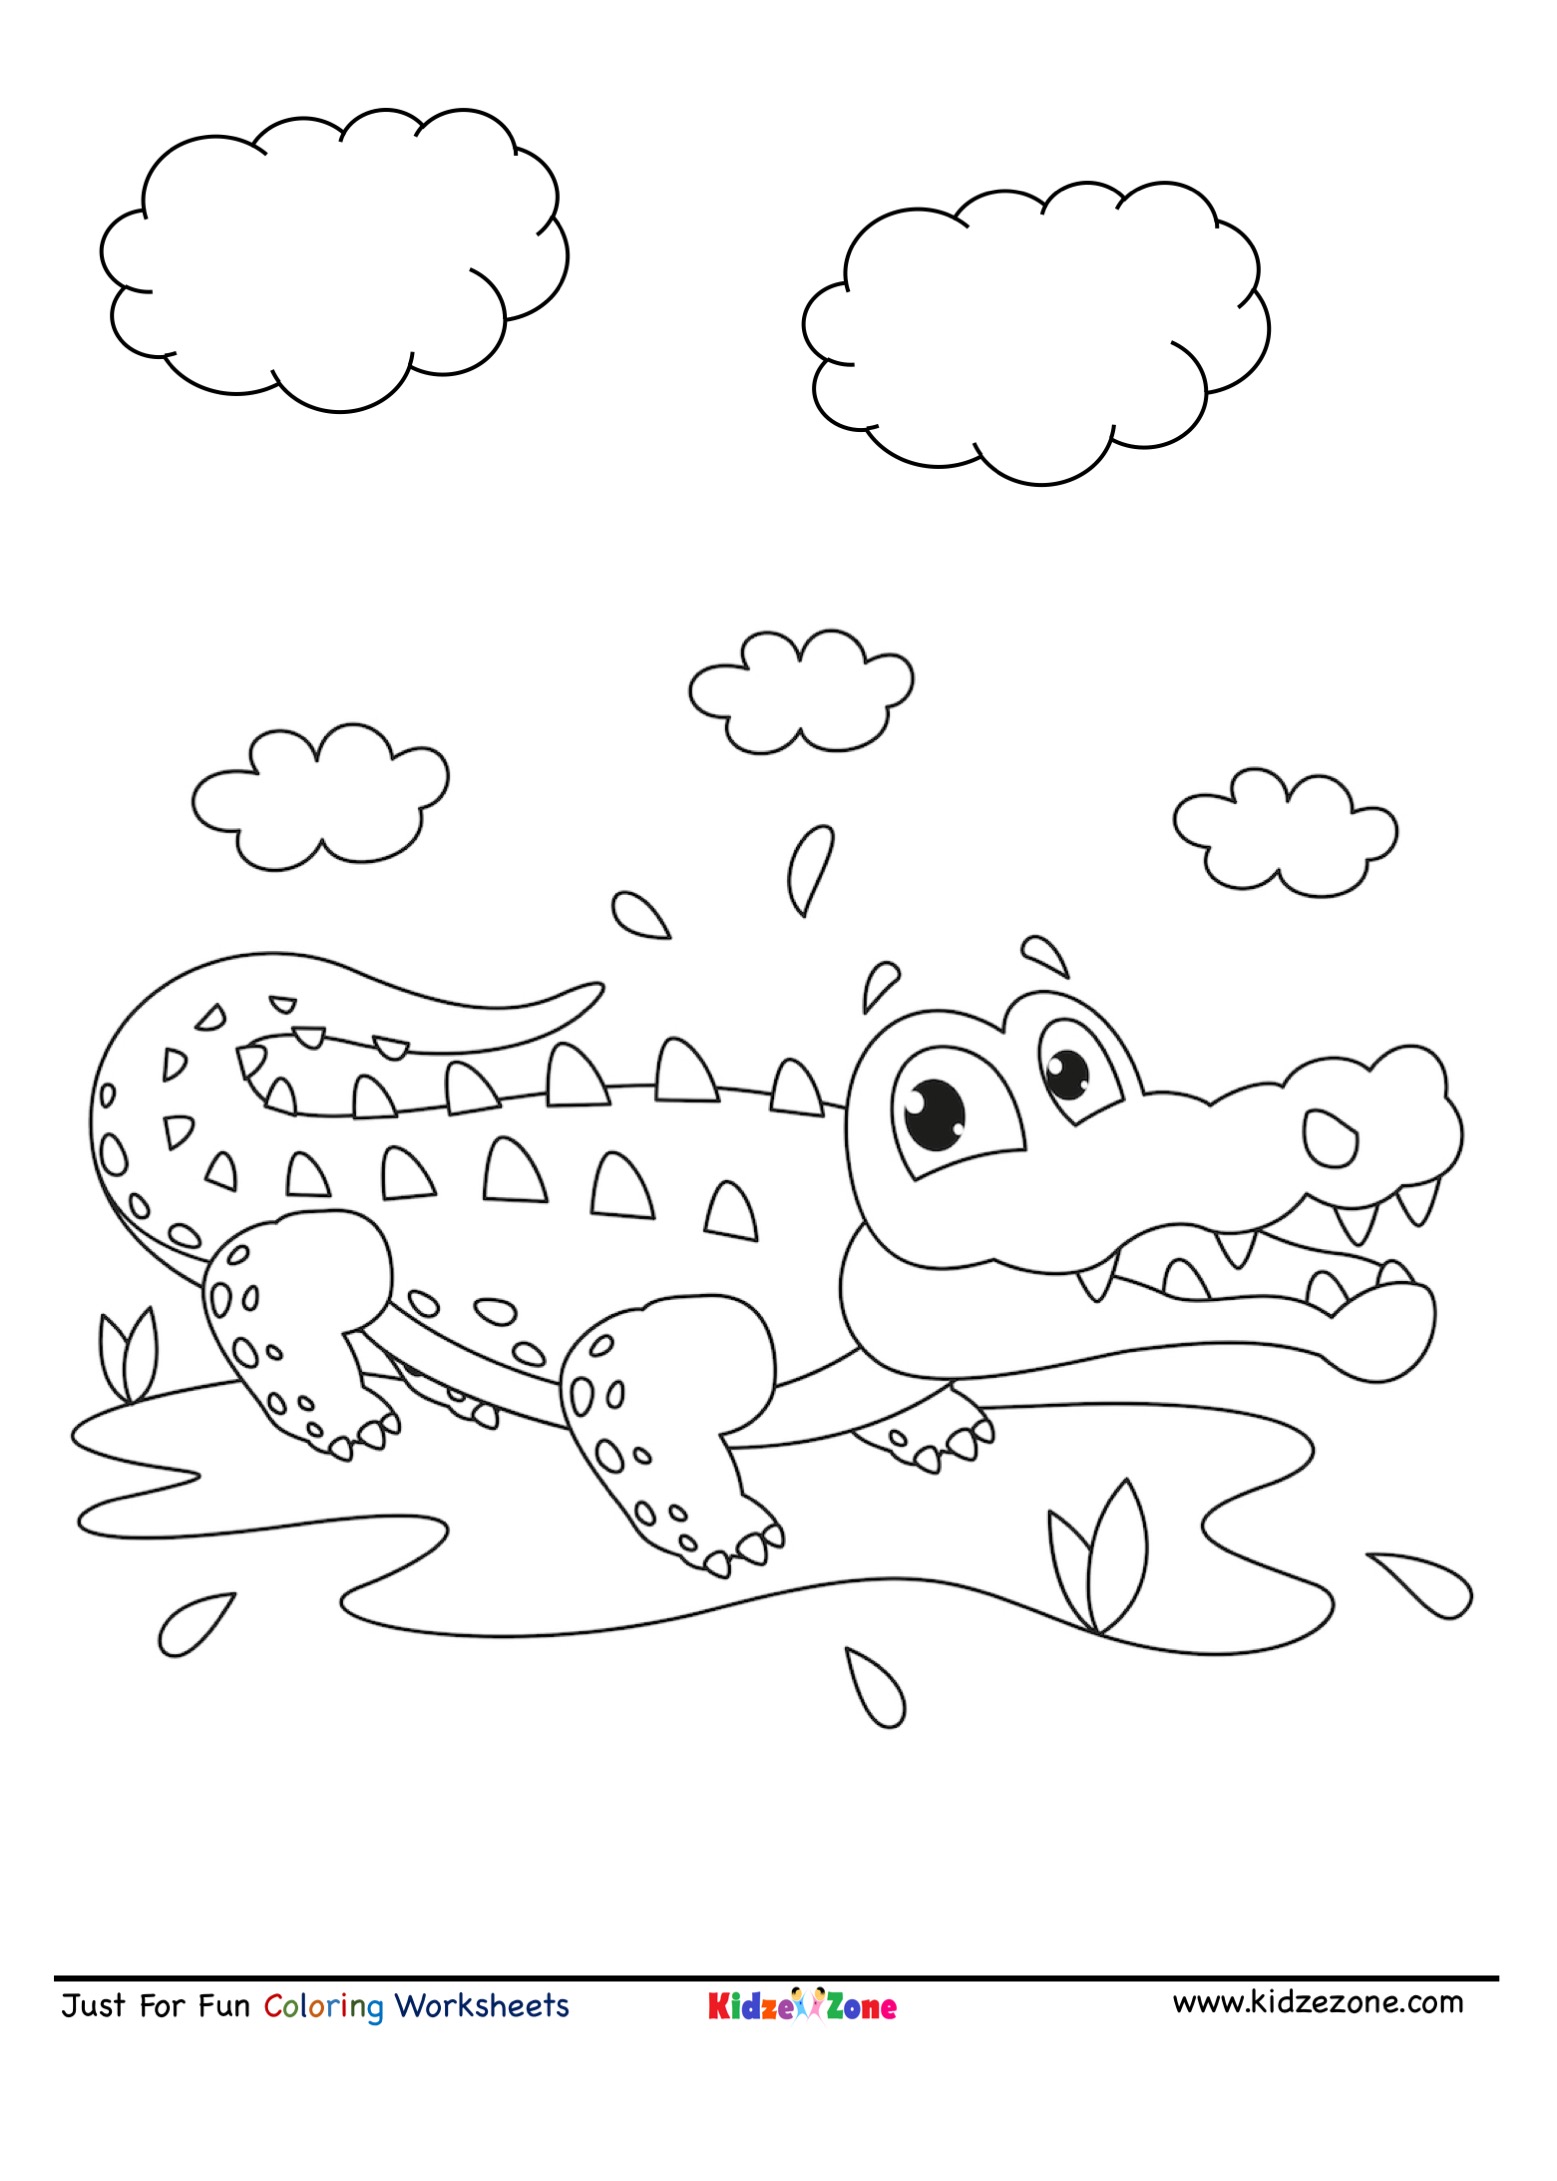 cute alligator coloring pages